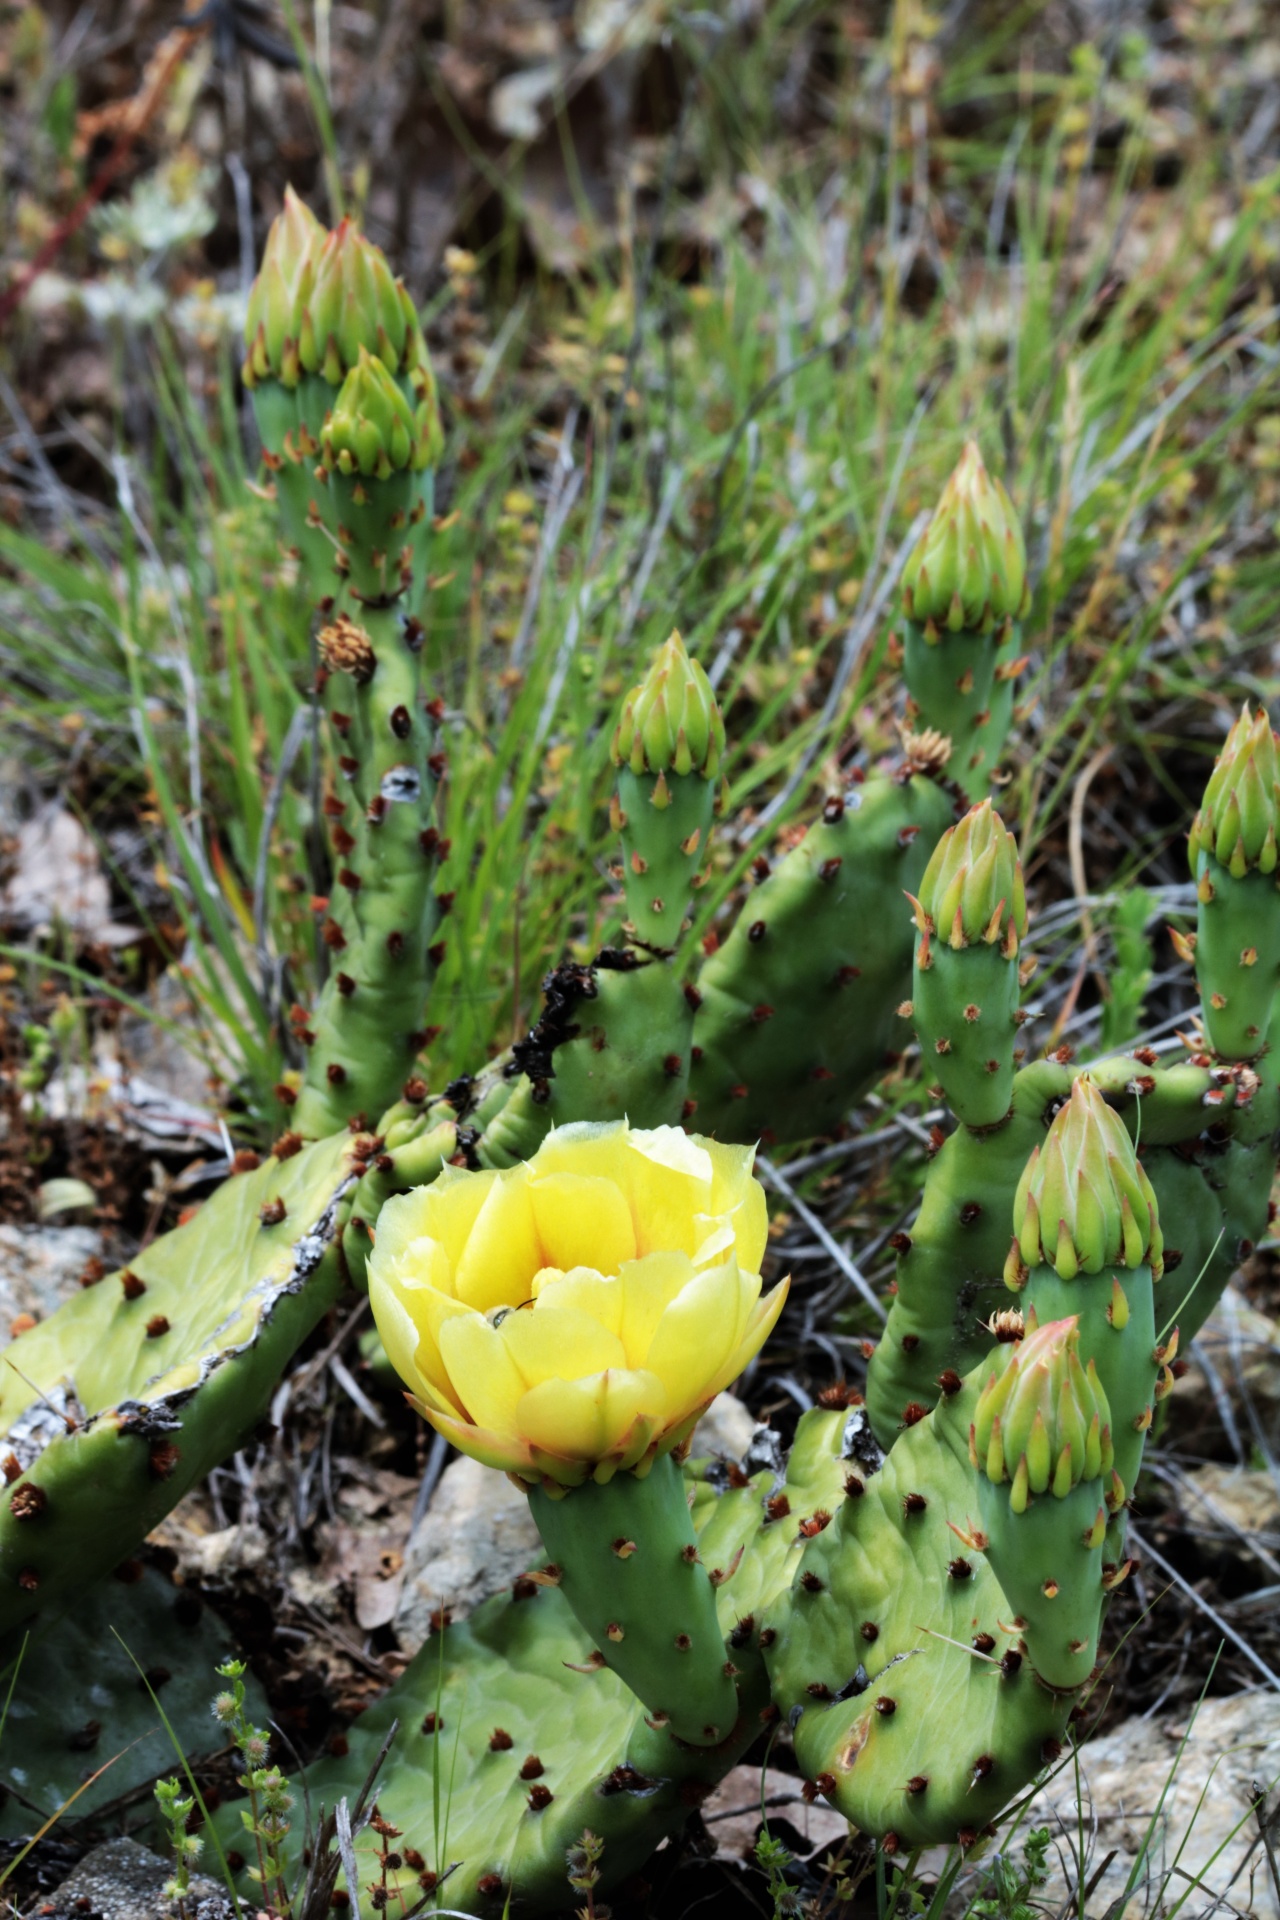 Prickly Pear Cactus Bloom And Buds